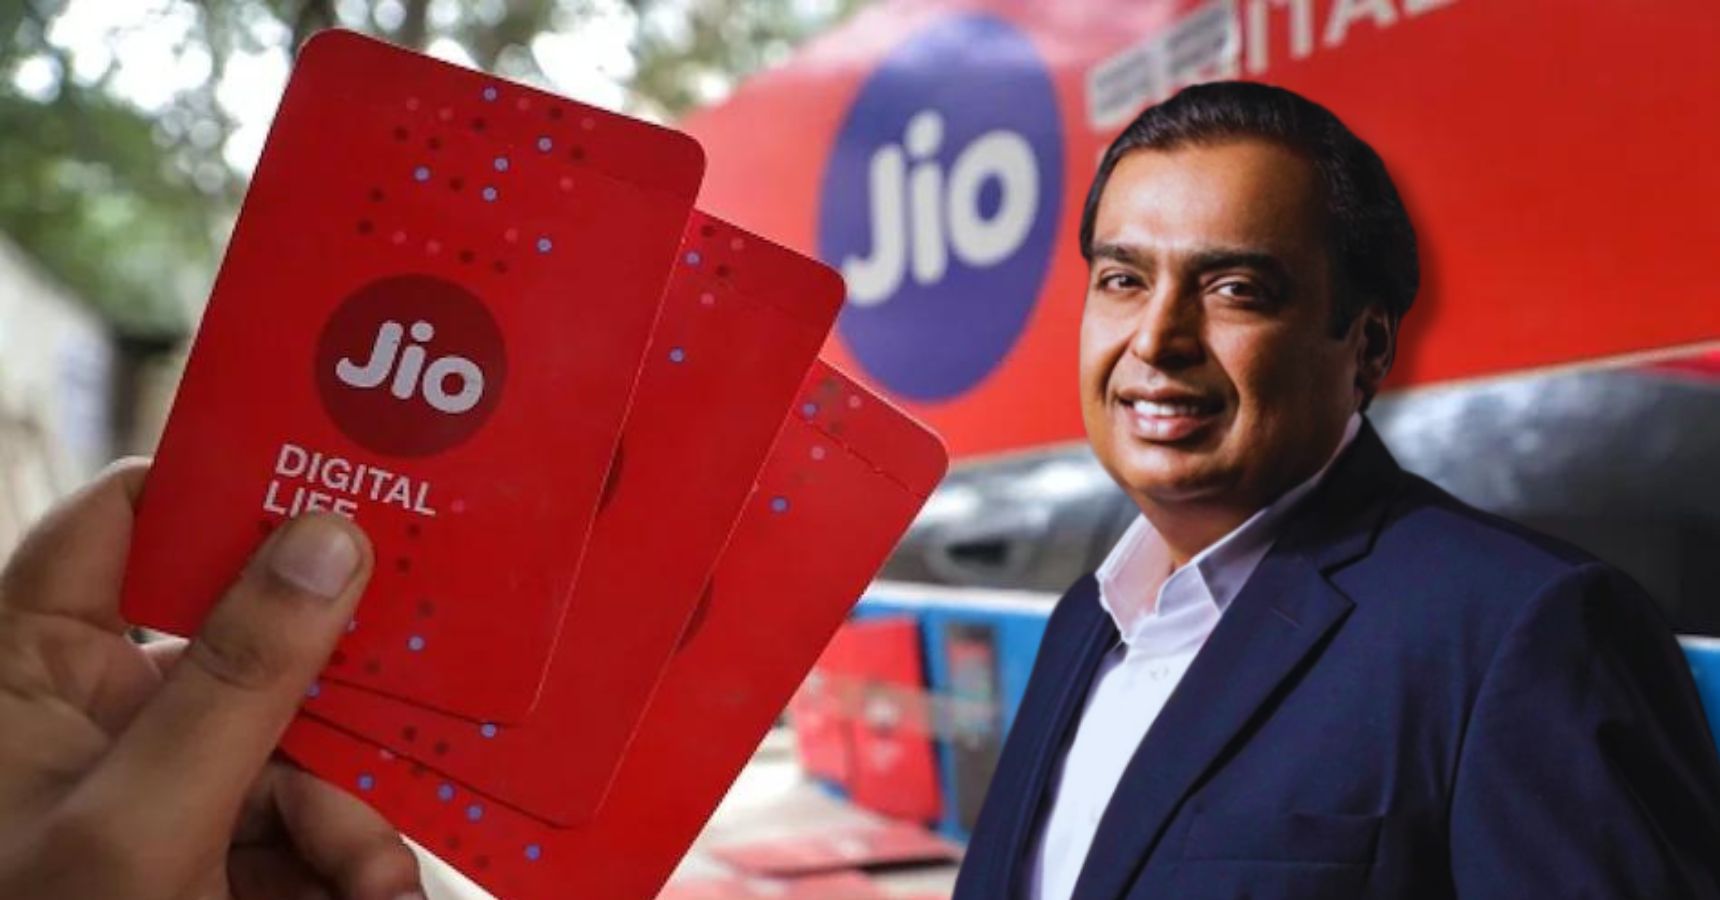 Jio has brought forward 5G data plan at a very cheap price